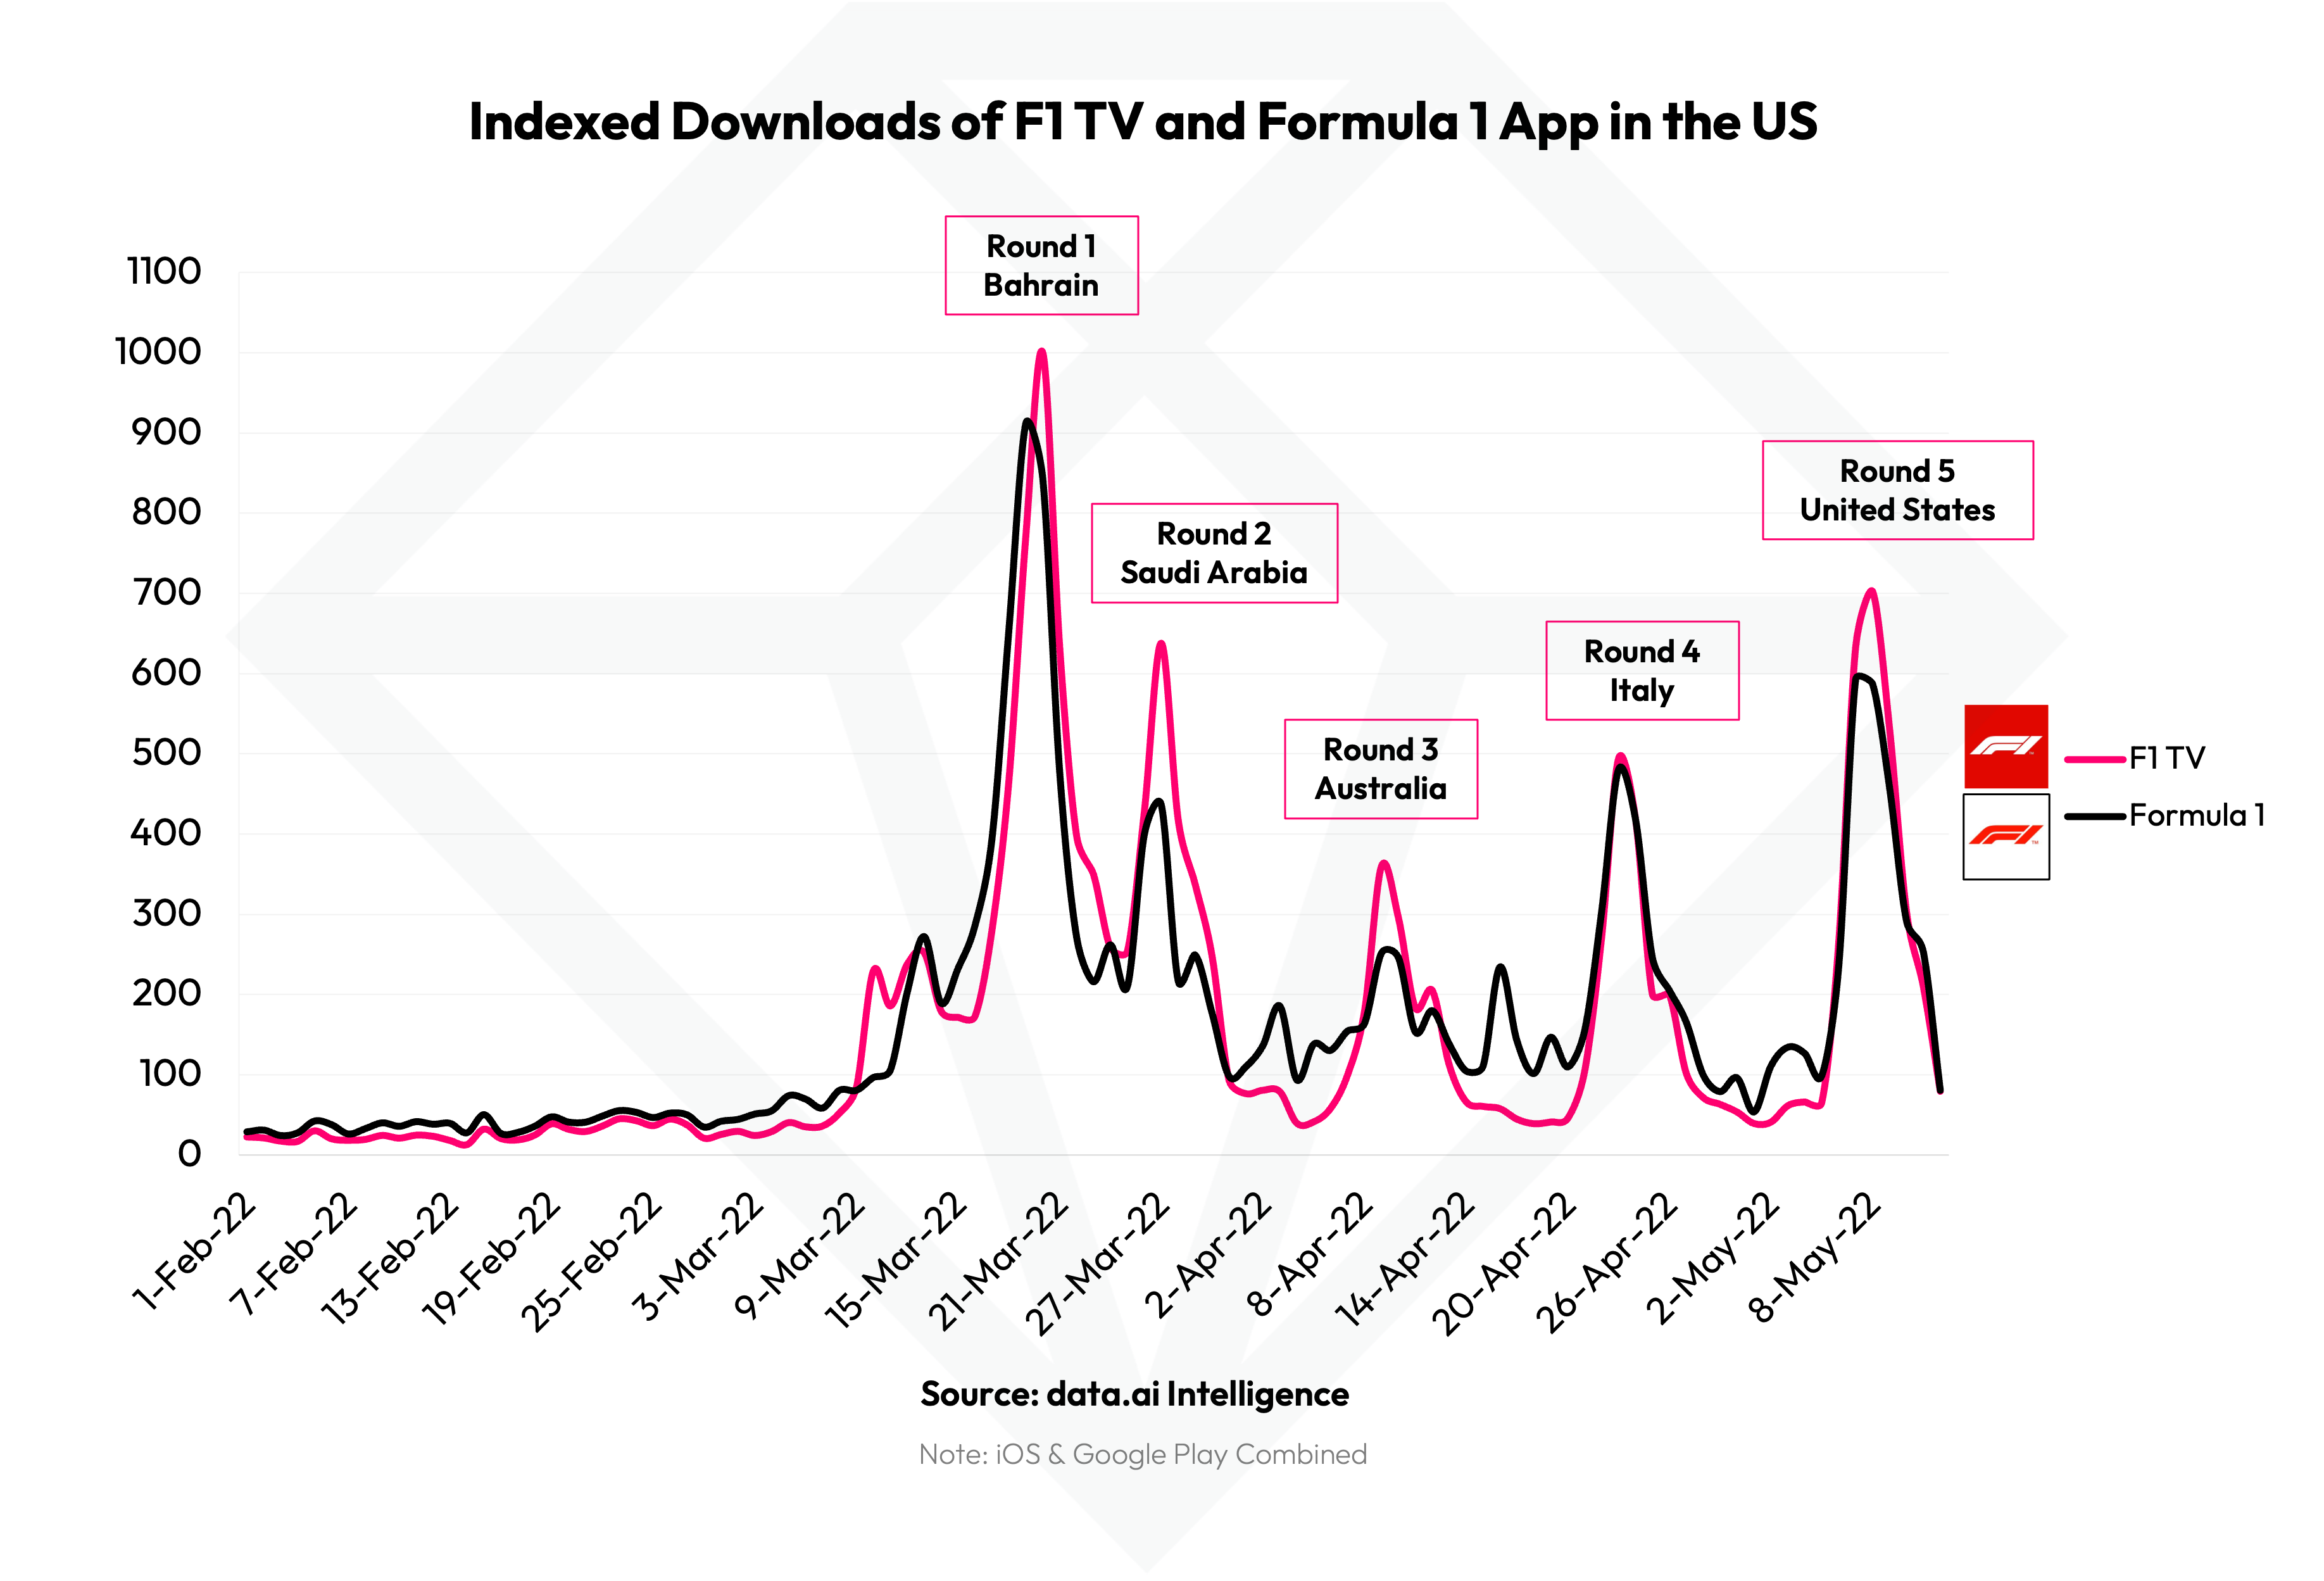 Mobile Minute Formula 1 2022 Drives 80% YoY Surge in Downloads